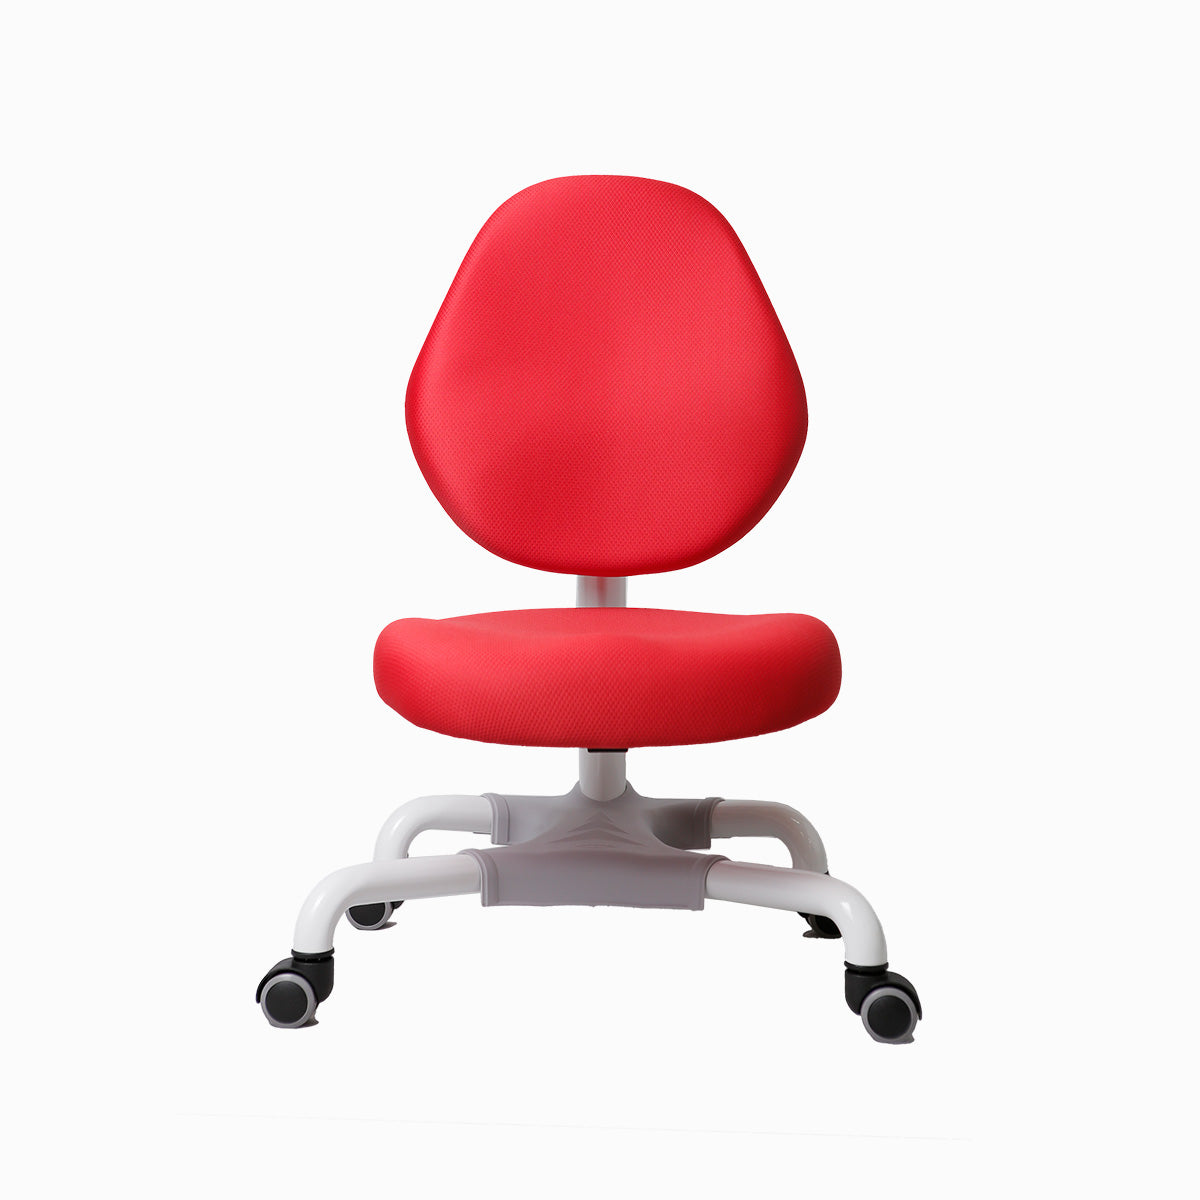 [SALE] IMPACT - DR-188-RD - Kids Ergonomic Chair (Red)